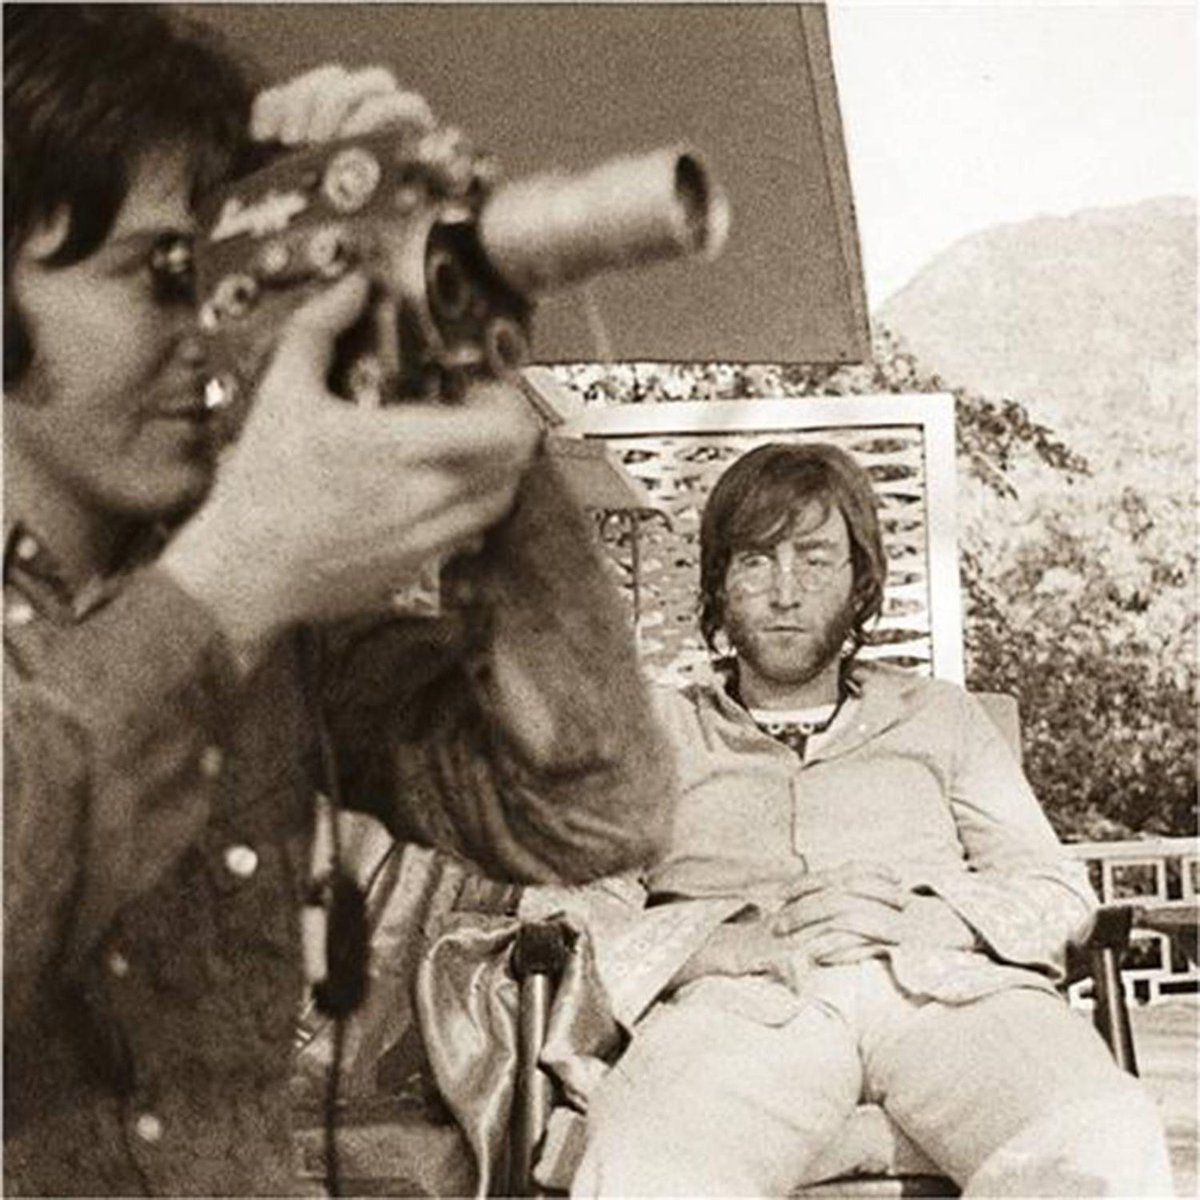 gather round, im about to tell you a story about how something happened between john and paul in the winter of 1968 that changed their relationship forever and eventually led to the beatles breakup also known as:  #WHATHAPPENEDINRISHIKESH , a thread